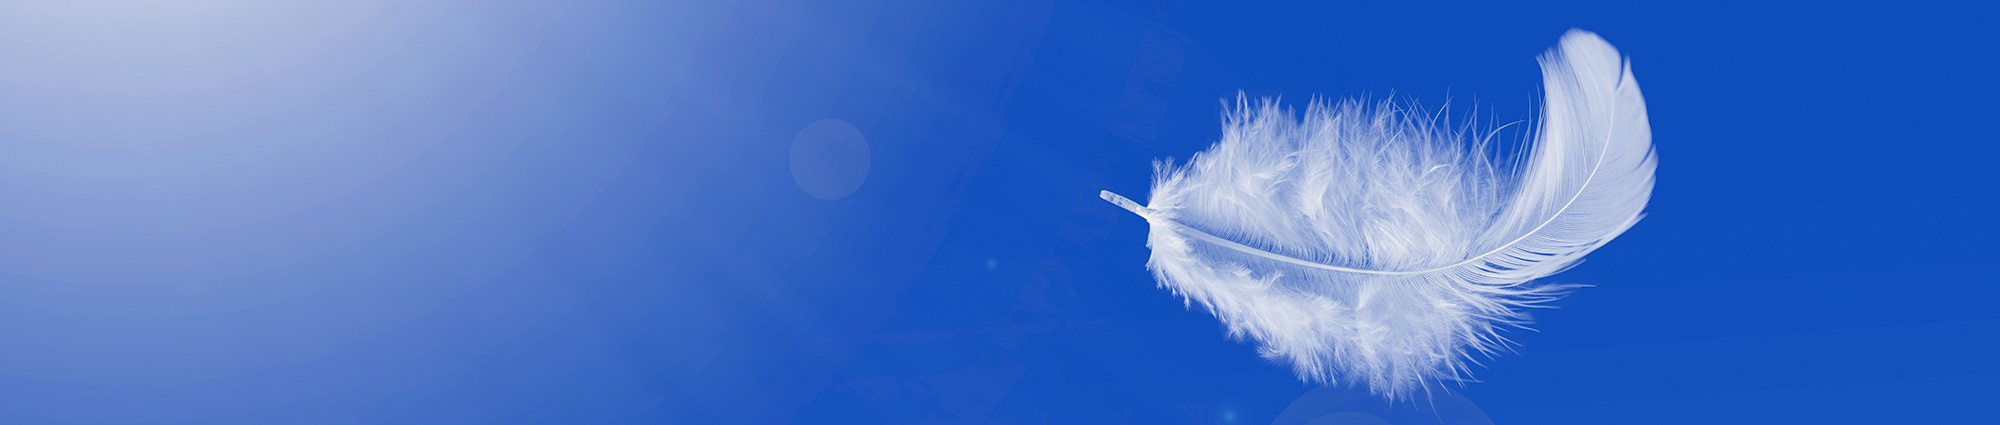 falling feather against a blue sky